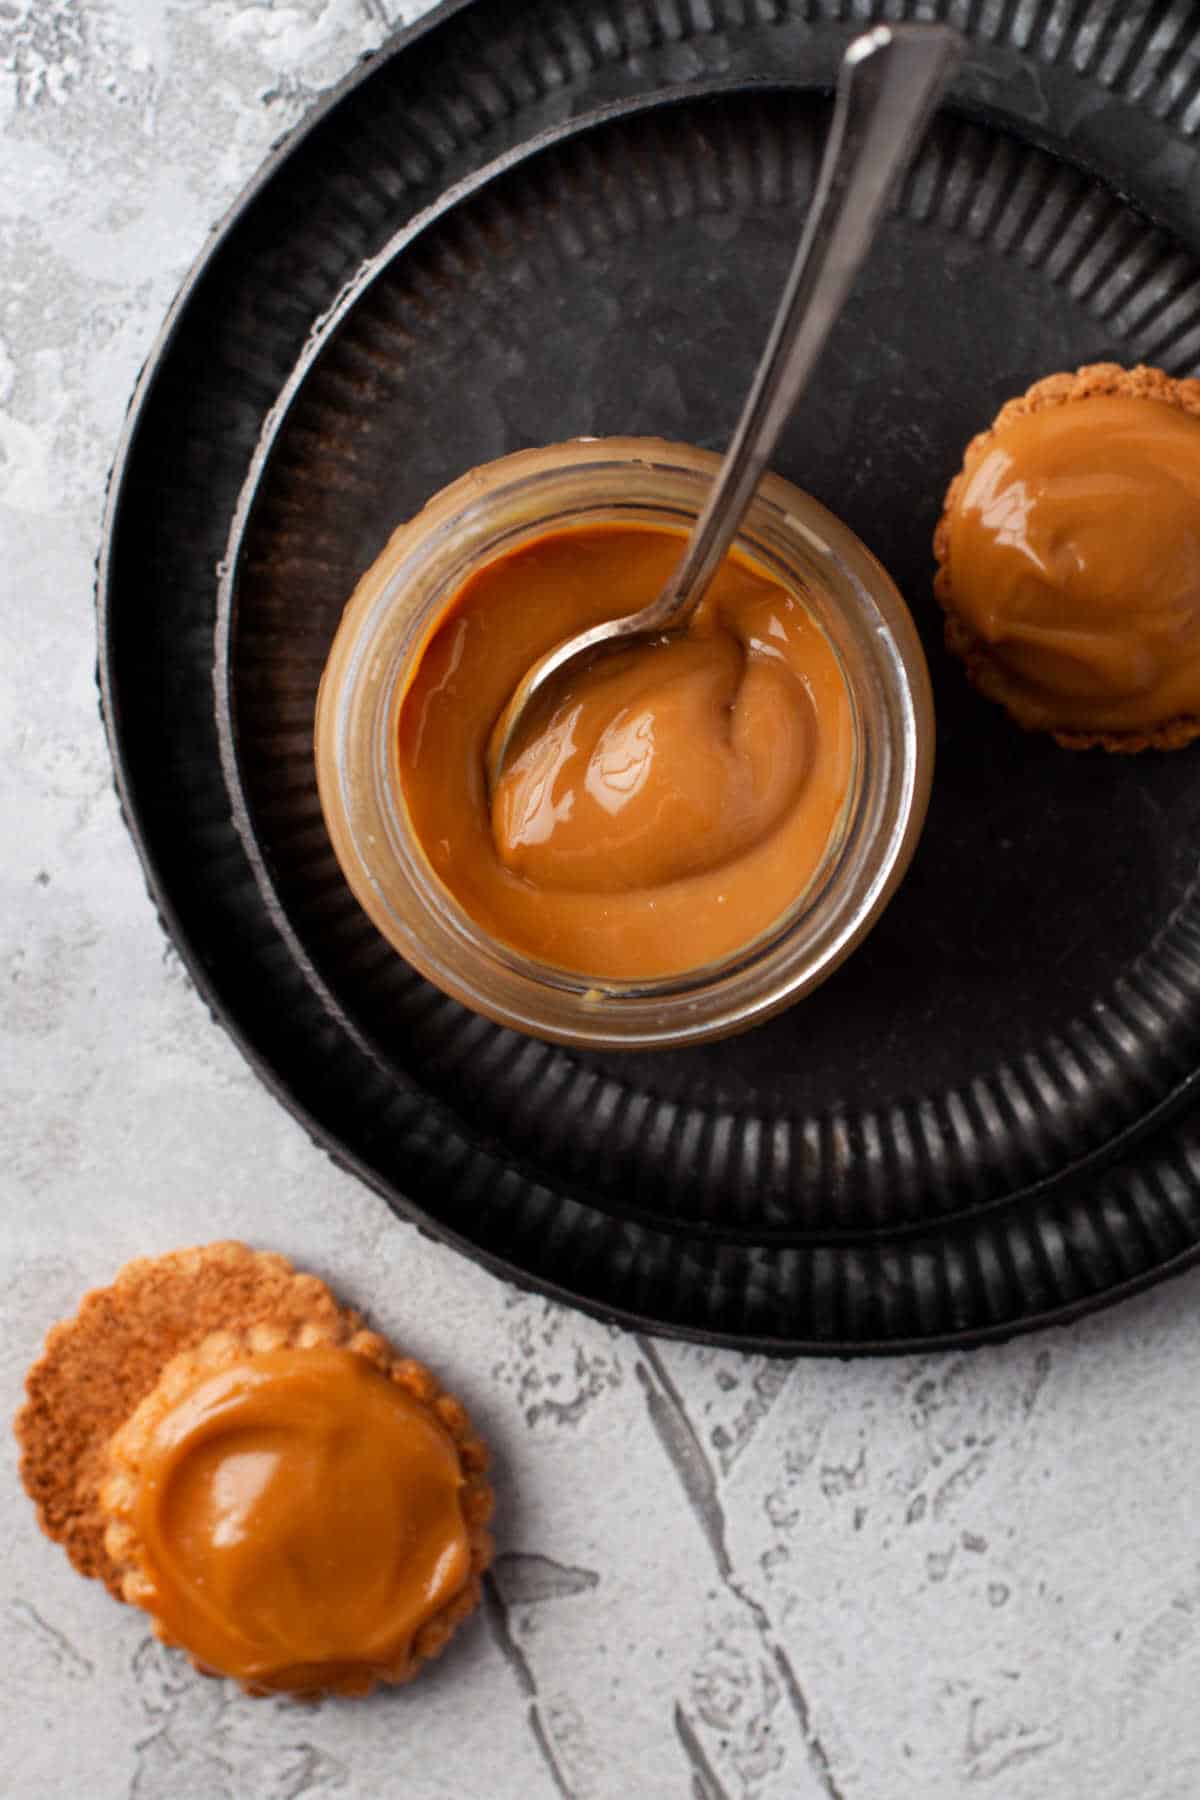 A jar of dulce de leche with a spoon on a platter with some cookies.